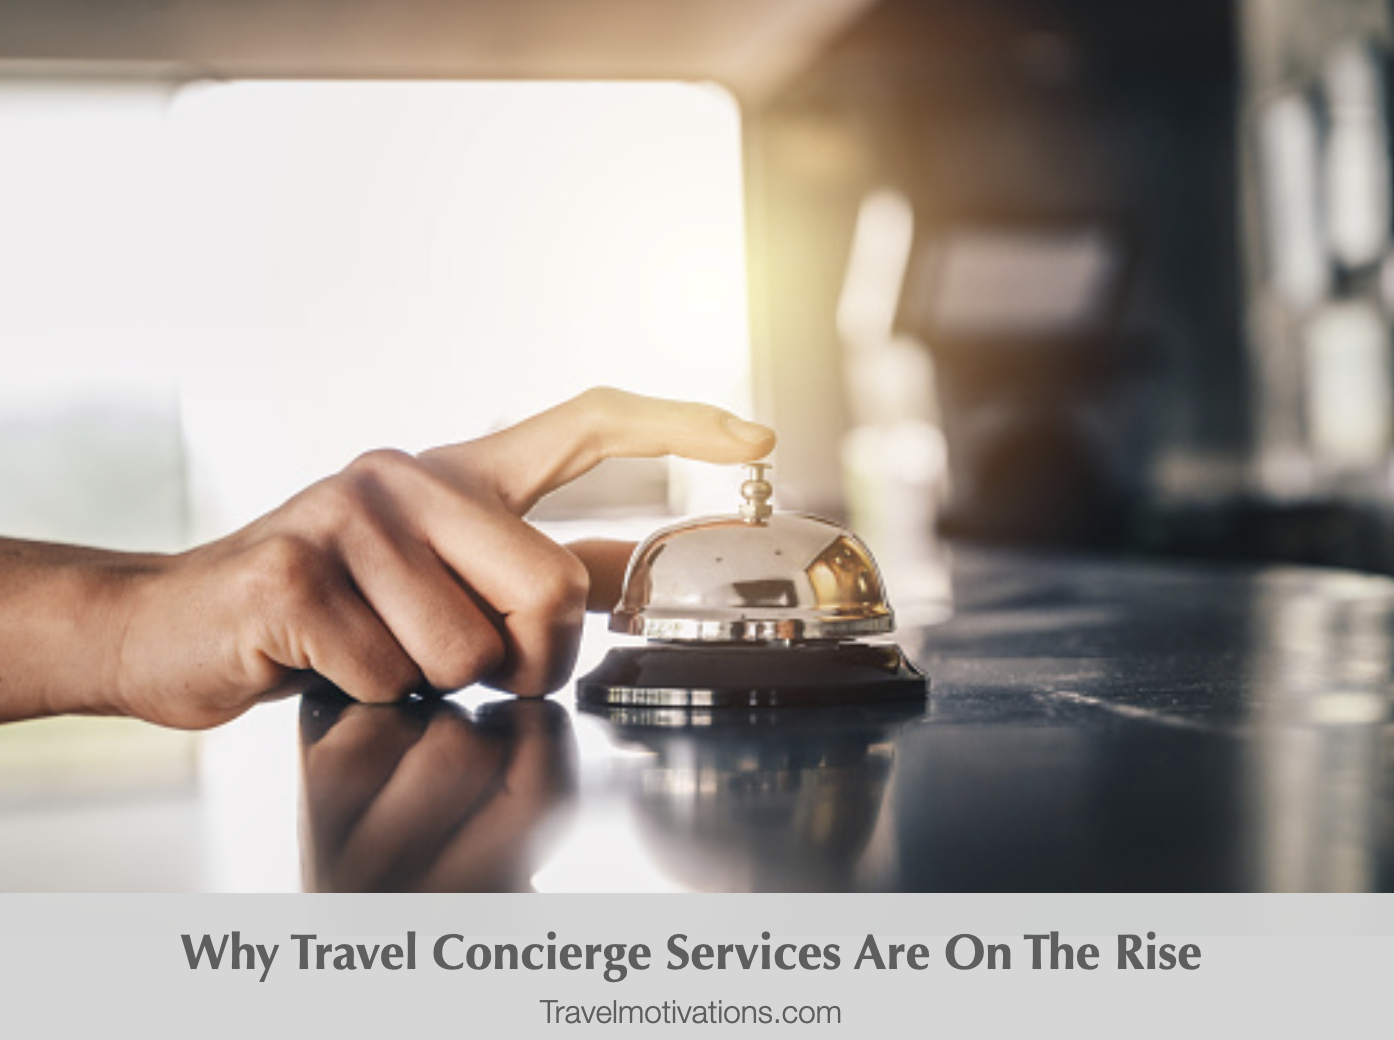 Why Travel Concierge Services are on the Rise